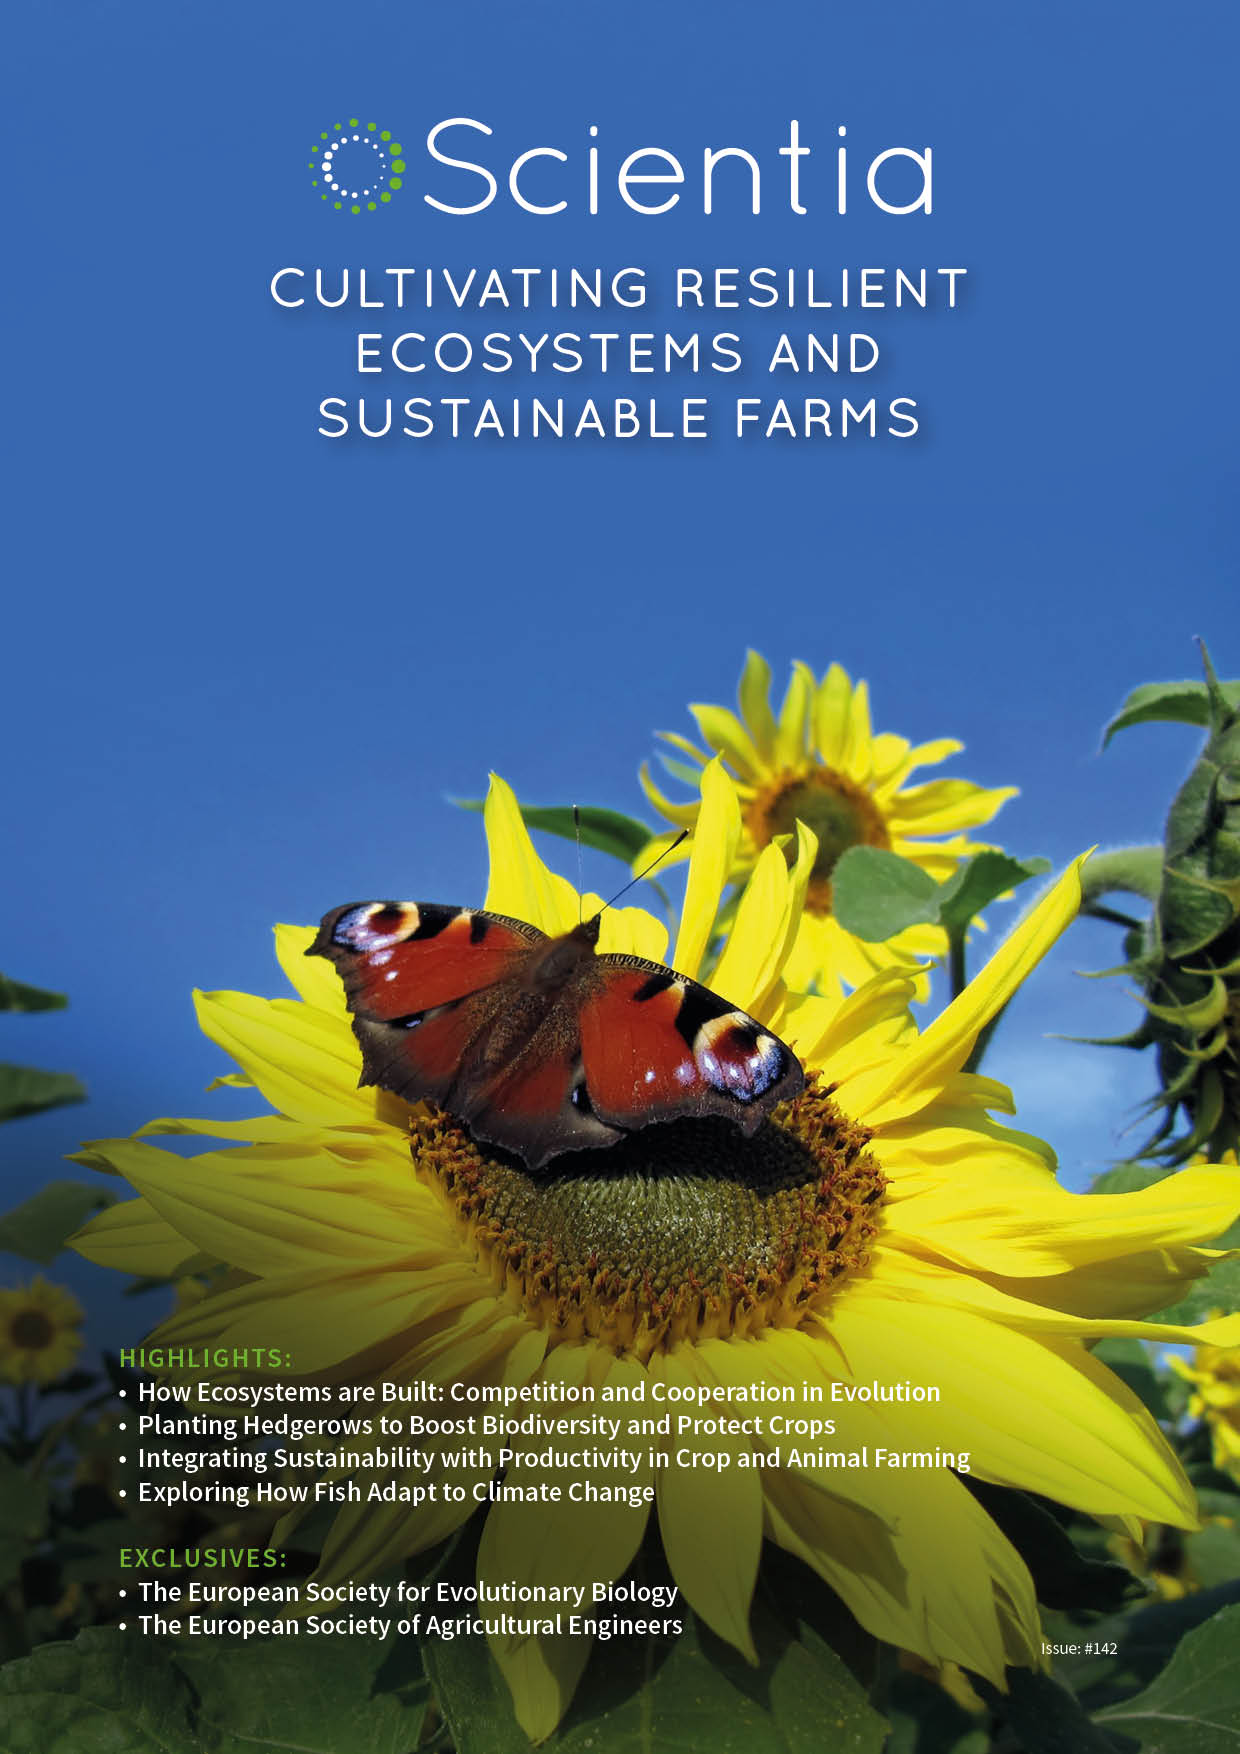 Scientia Issue #142 | Cultivating Resilient Ecosystems and Sustainable Farms